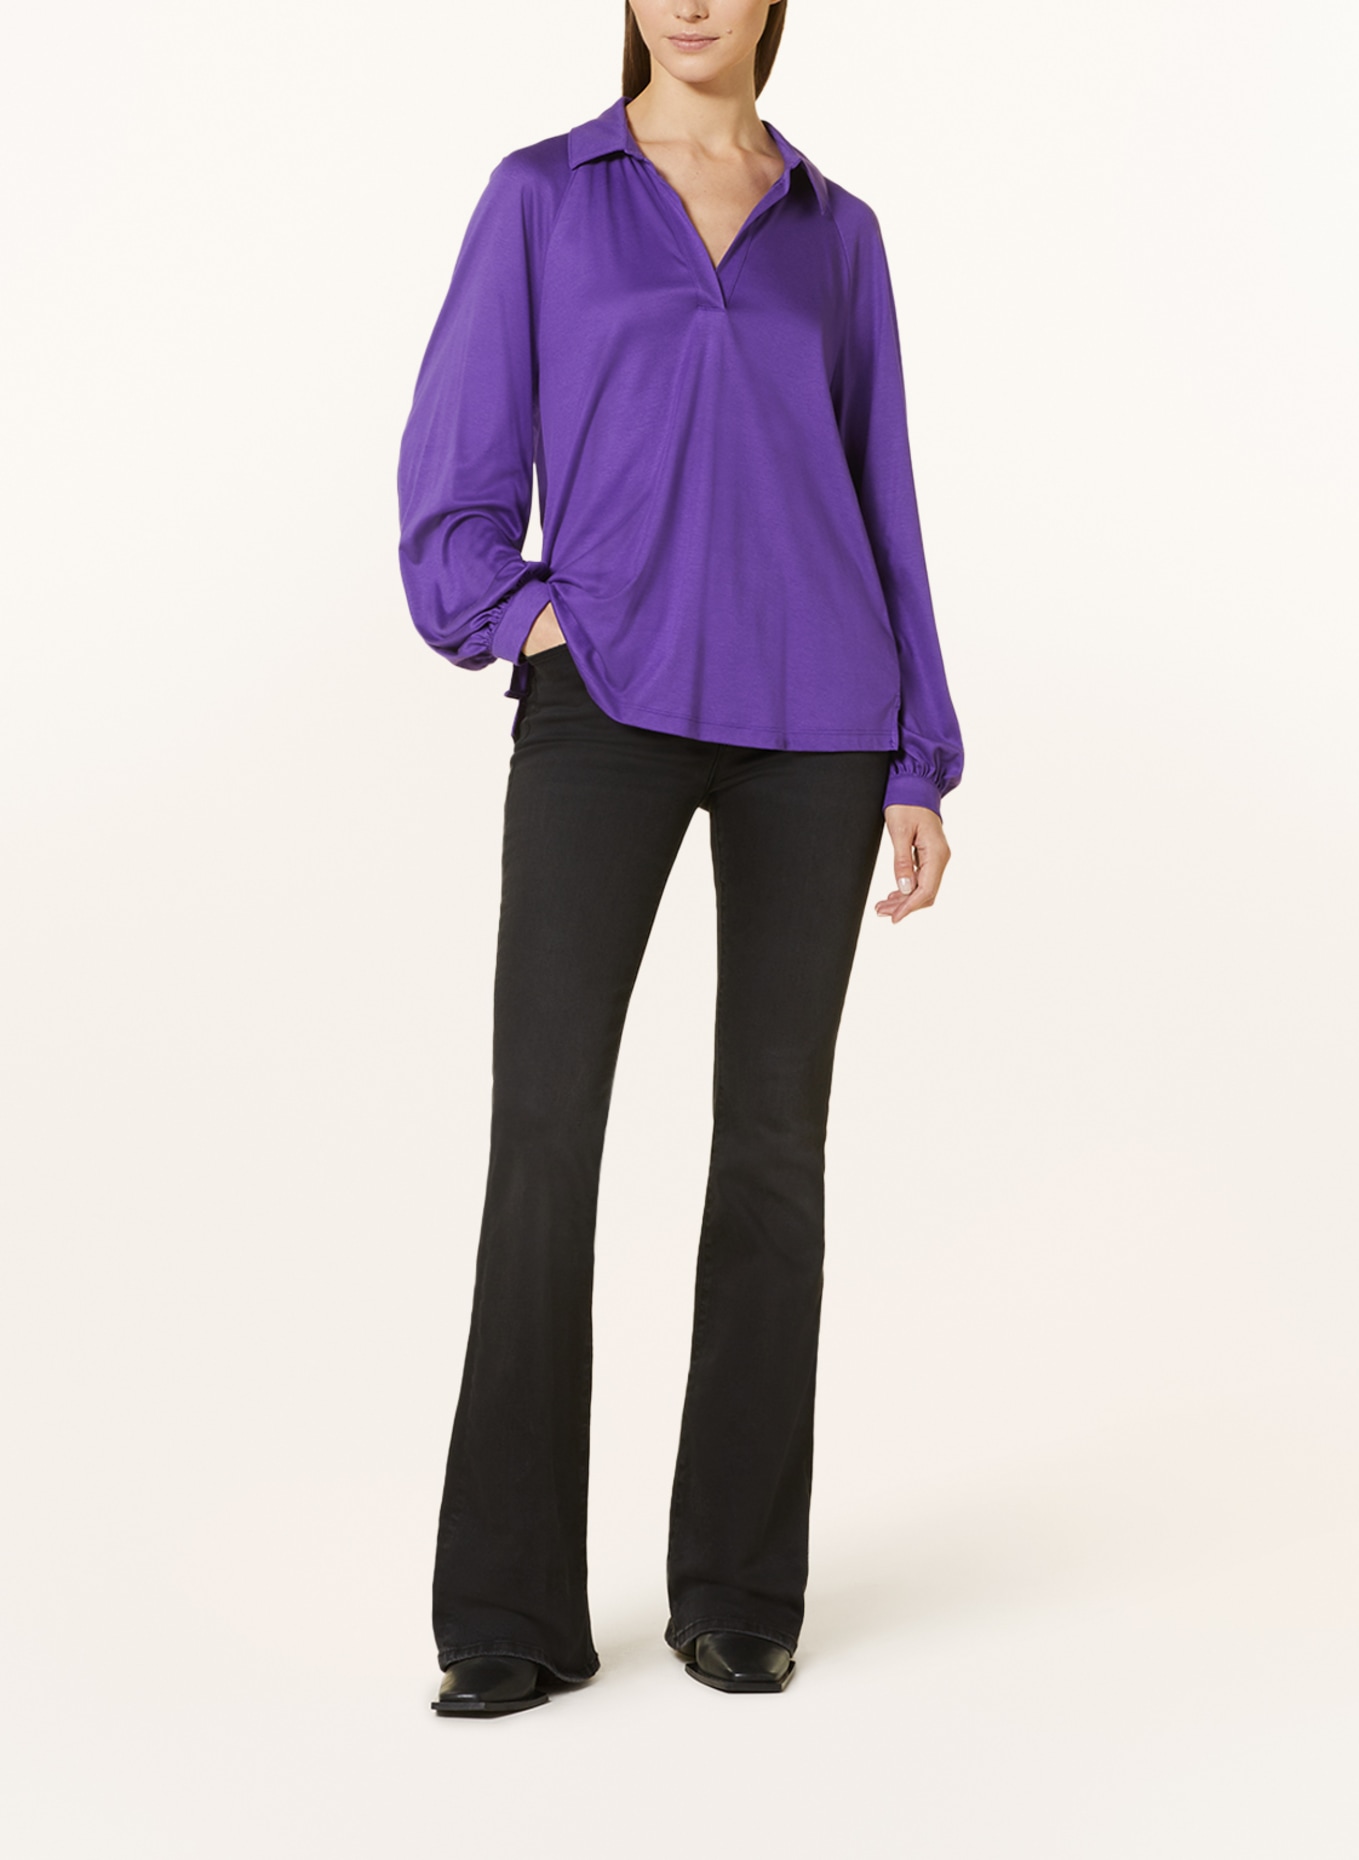 DESOTO Shirt blouse LUCY made of jersey, Color: PURPLE (Image 2)